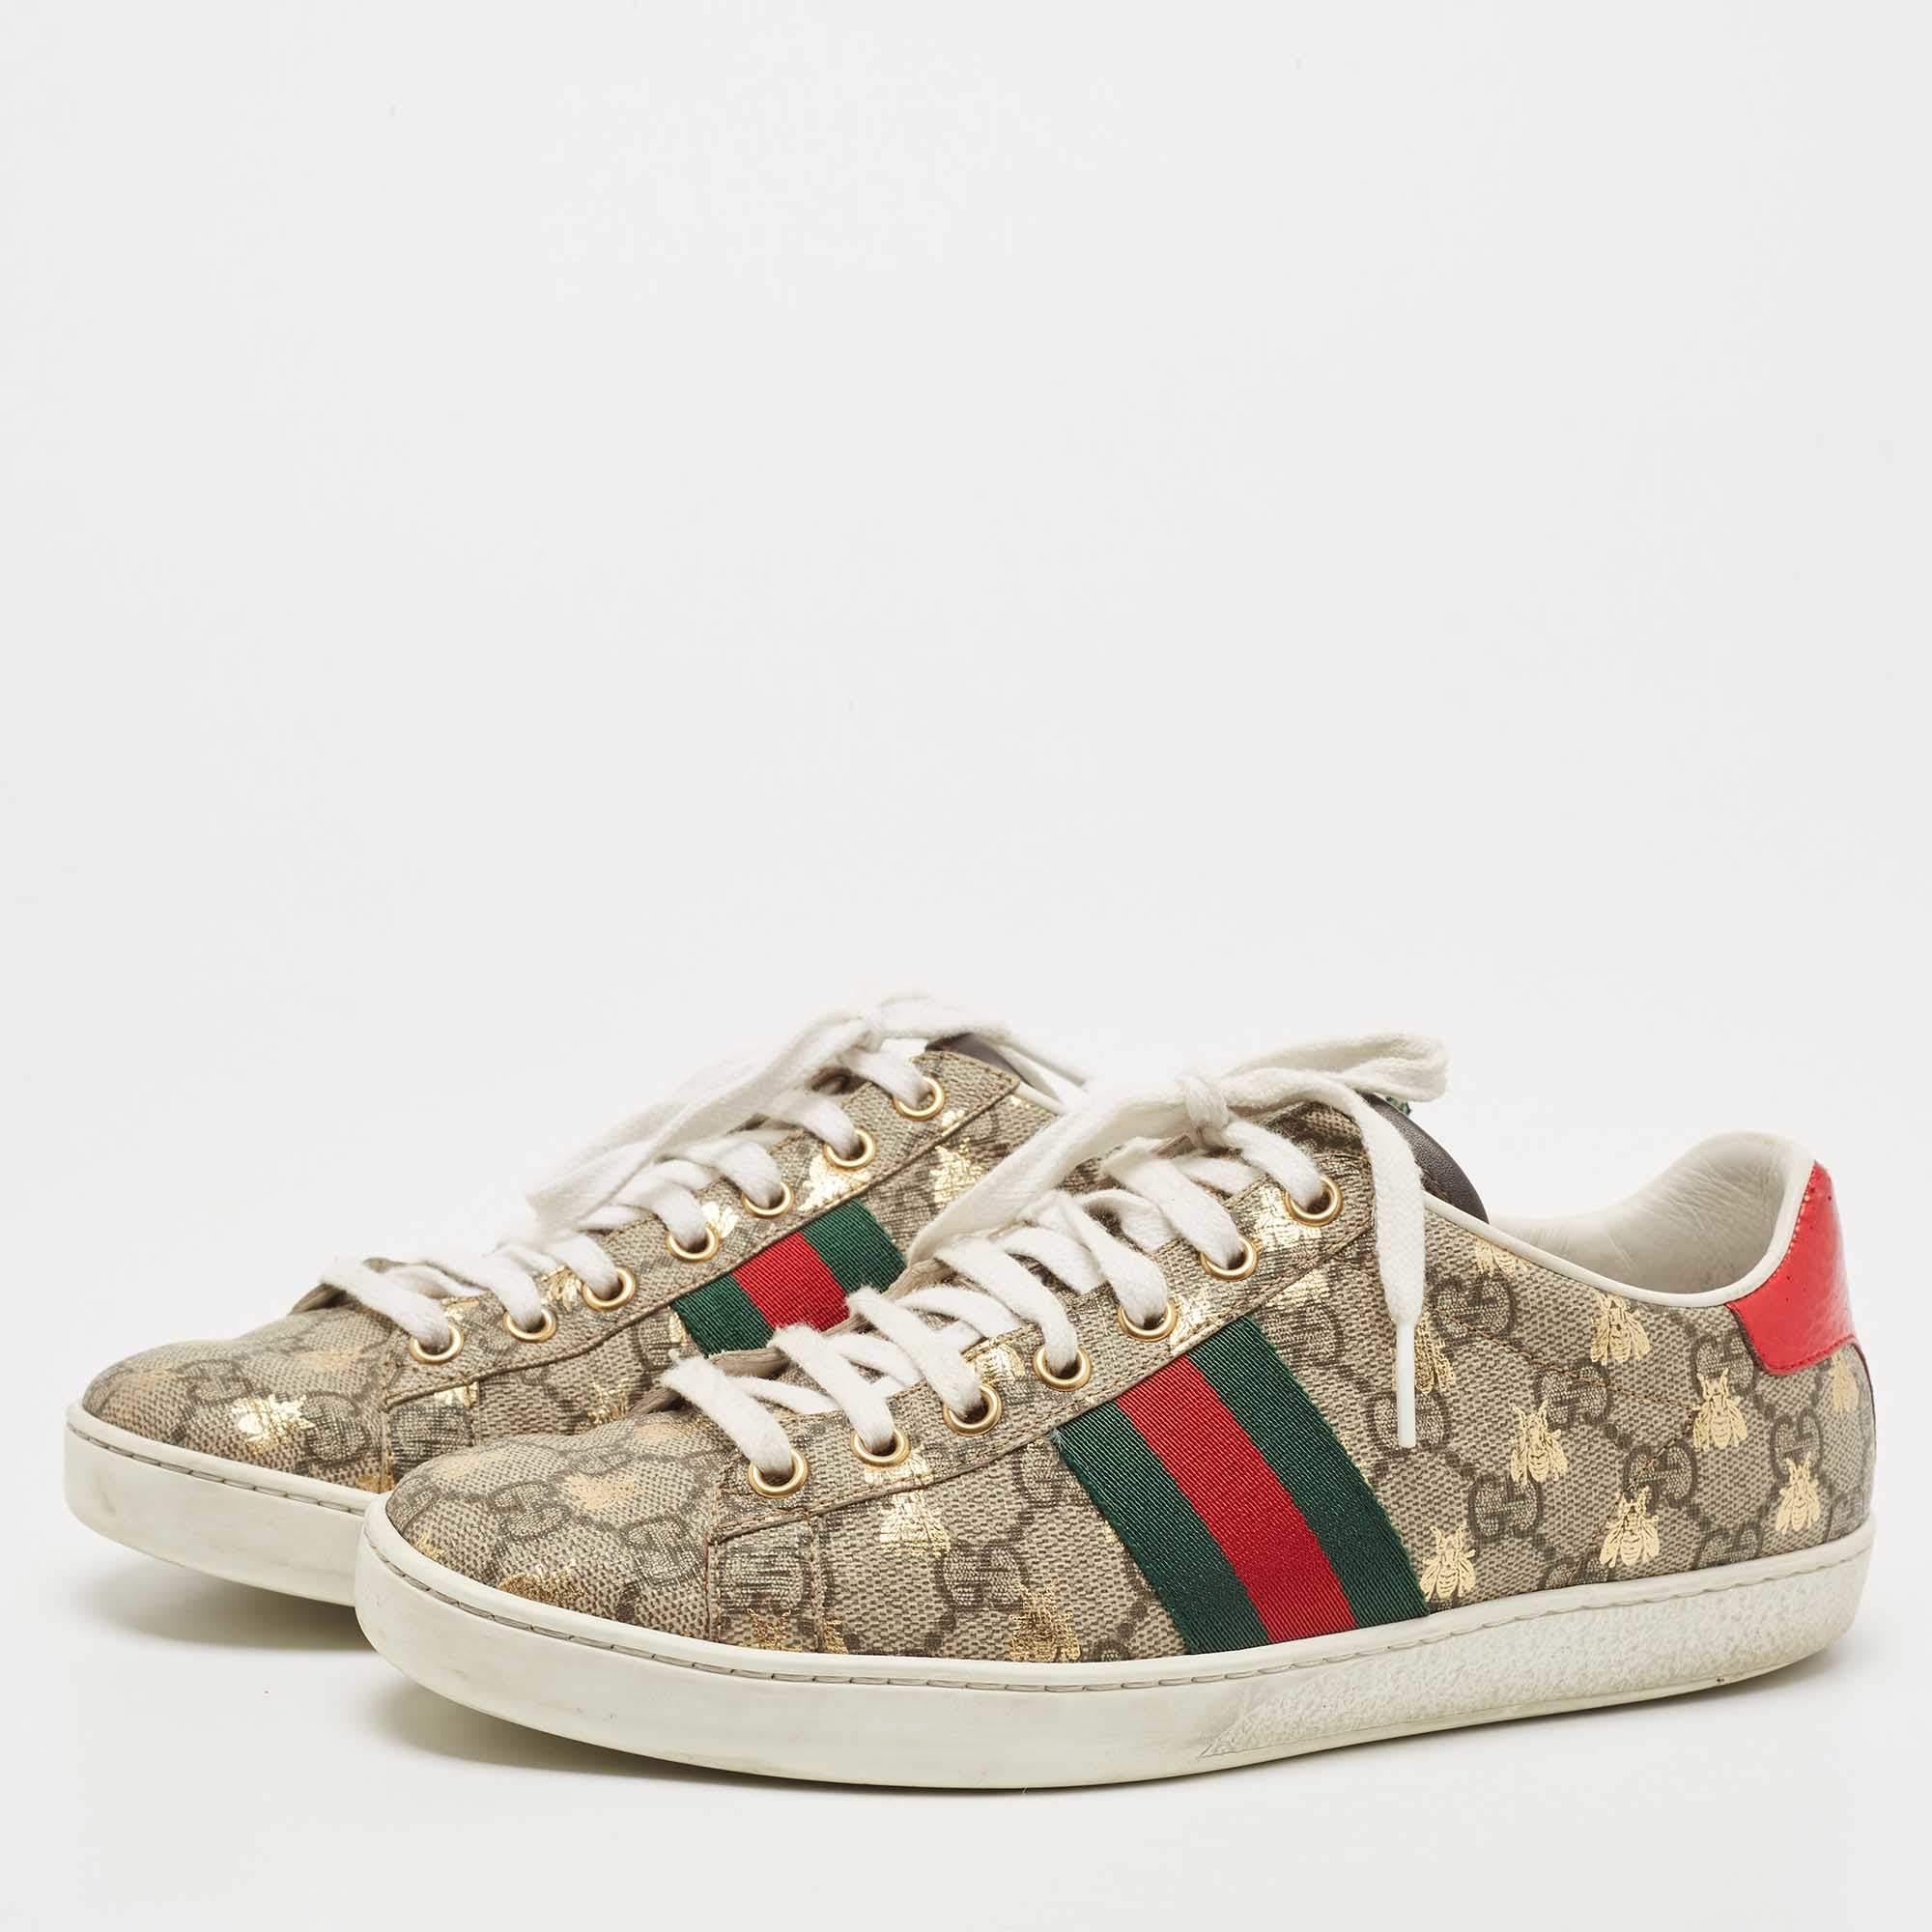 Women's Gucci Brown/Beige GG Supreme Canvas Bee Print Ace Sneakers Size 38